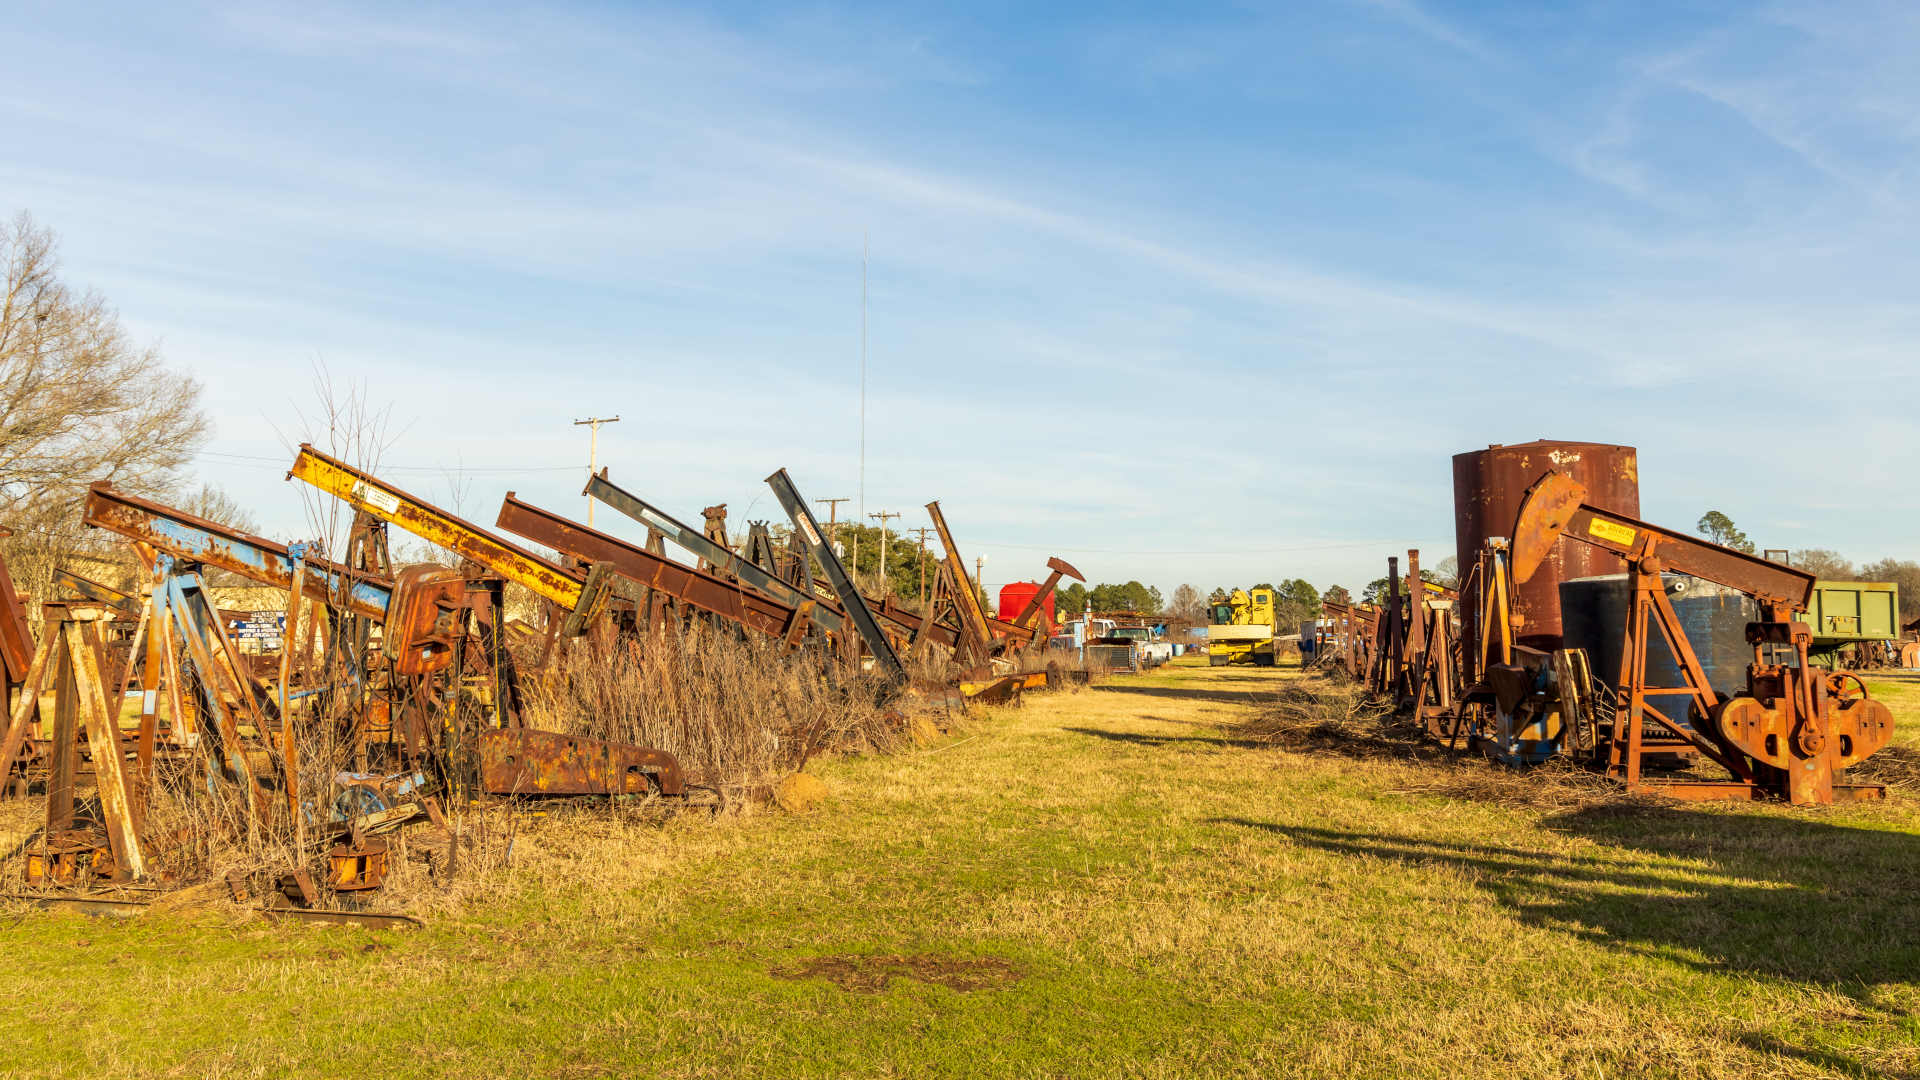 A cemetery of old oil and gas pumpjacks in Louisiana.